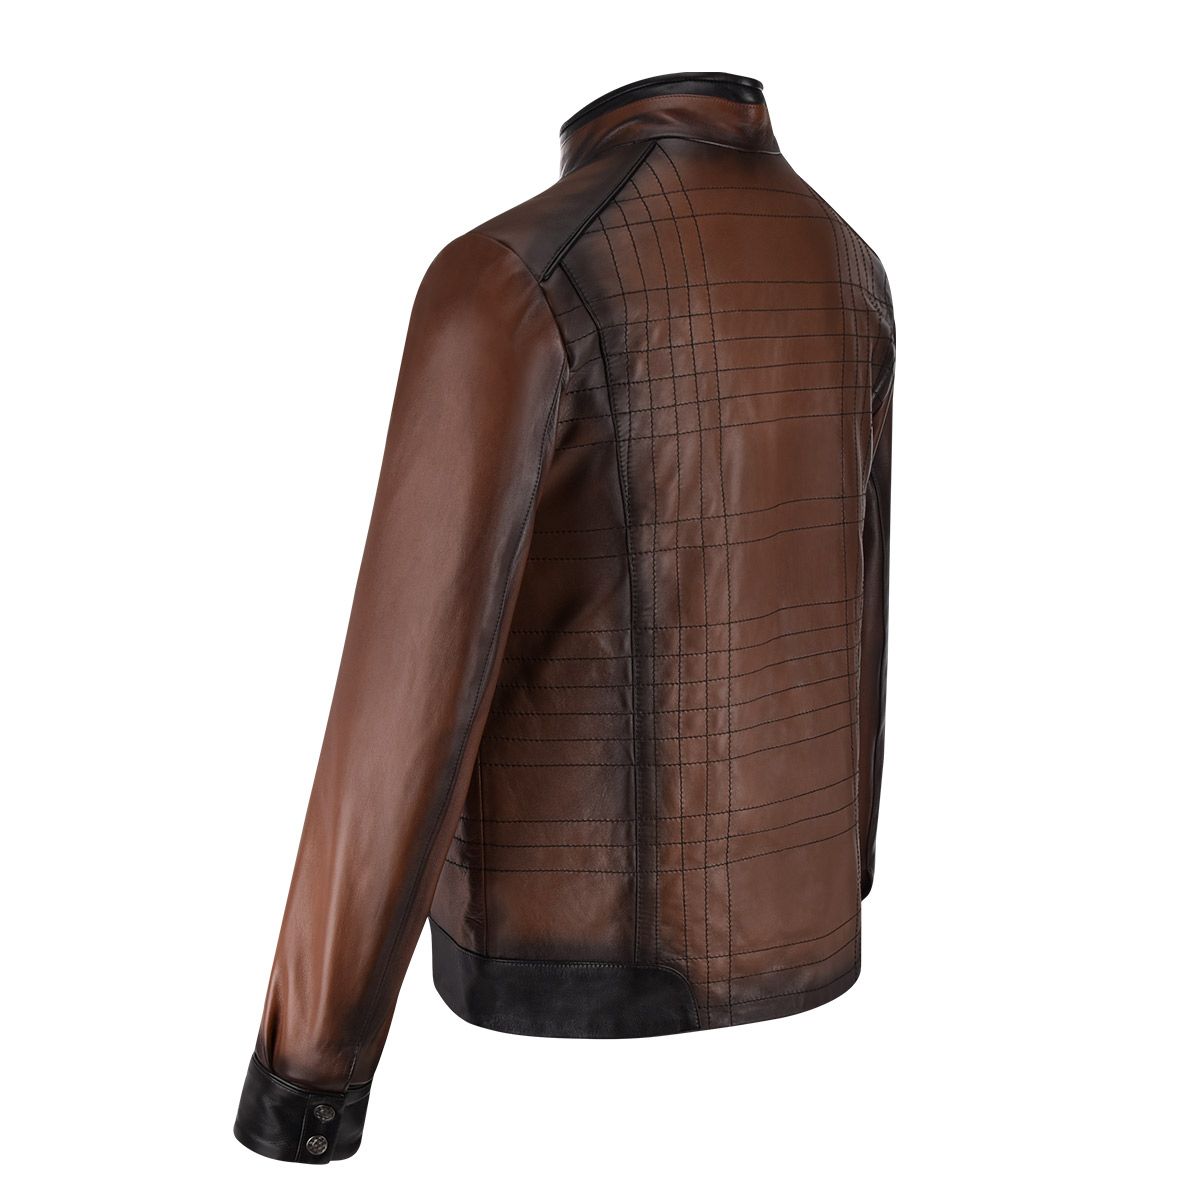 H293COB - Cuadra brown casual fashion quilted sheepskin leather jacket for men-Kuet.us